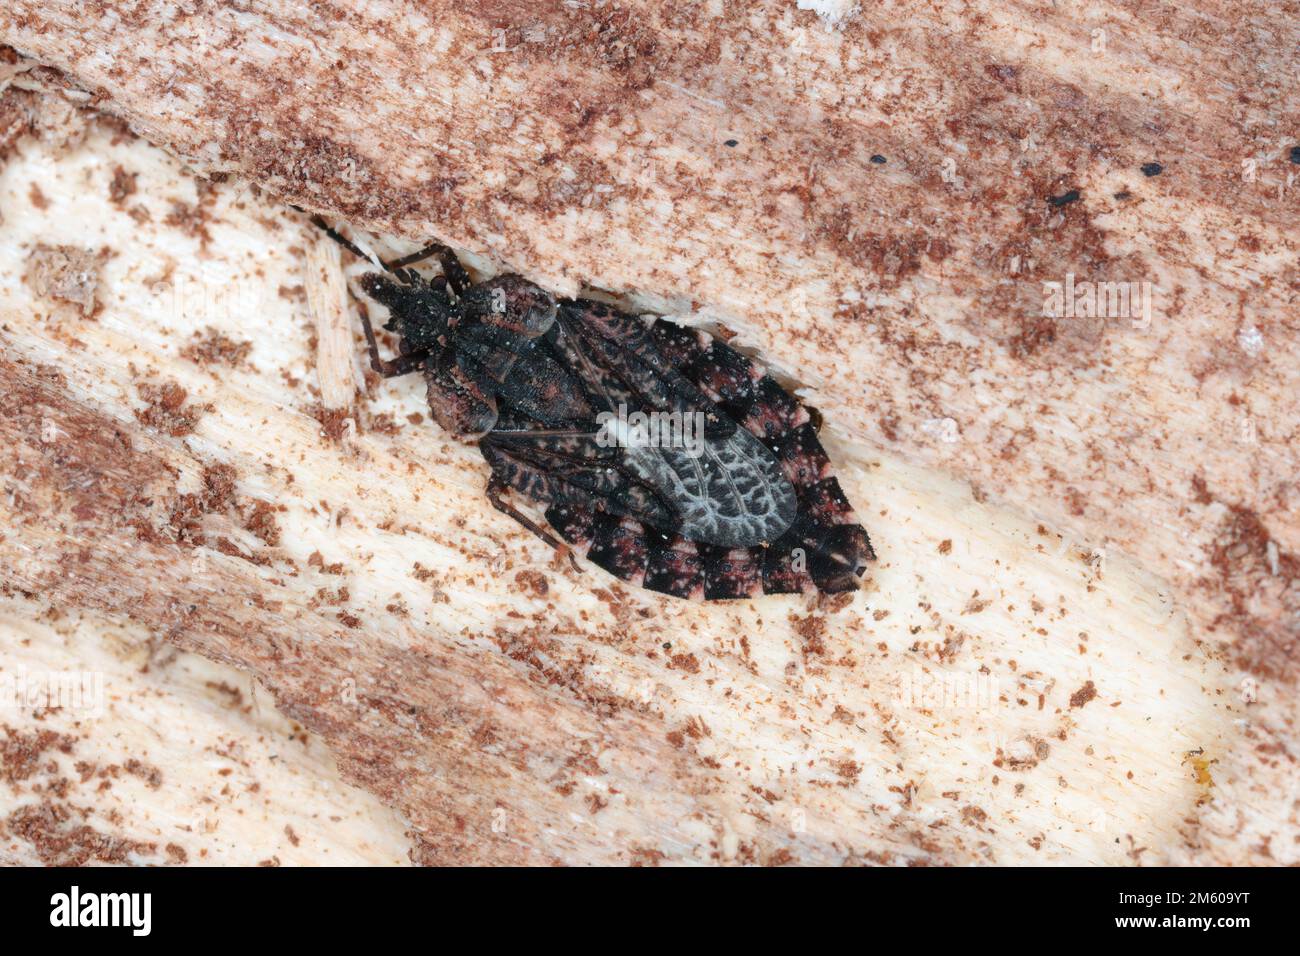 Closeup of a small common flatbug (Aradus sp.) under the bark of a dead tree in the forest. Stock Photo